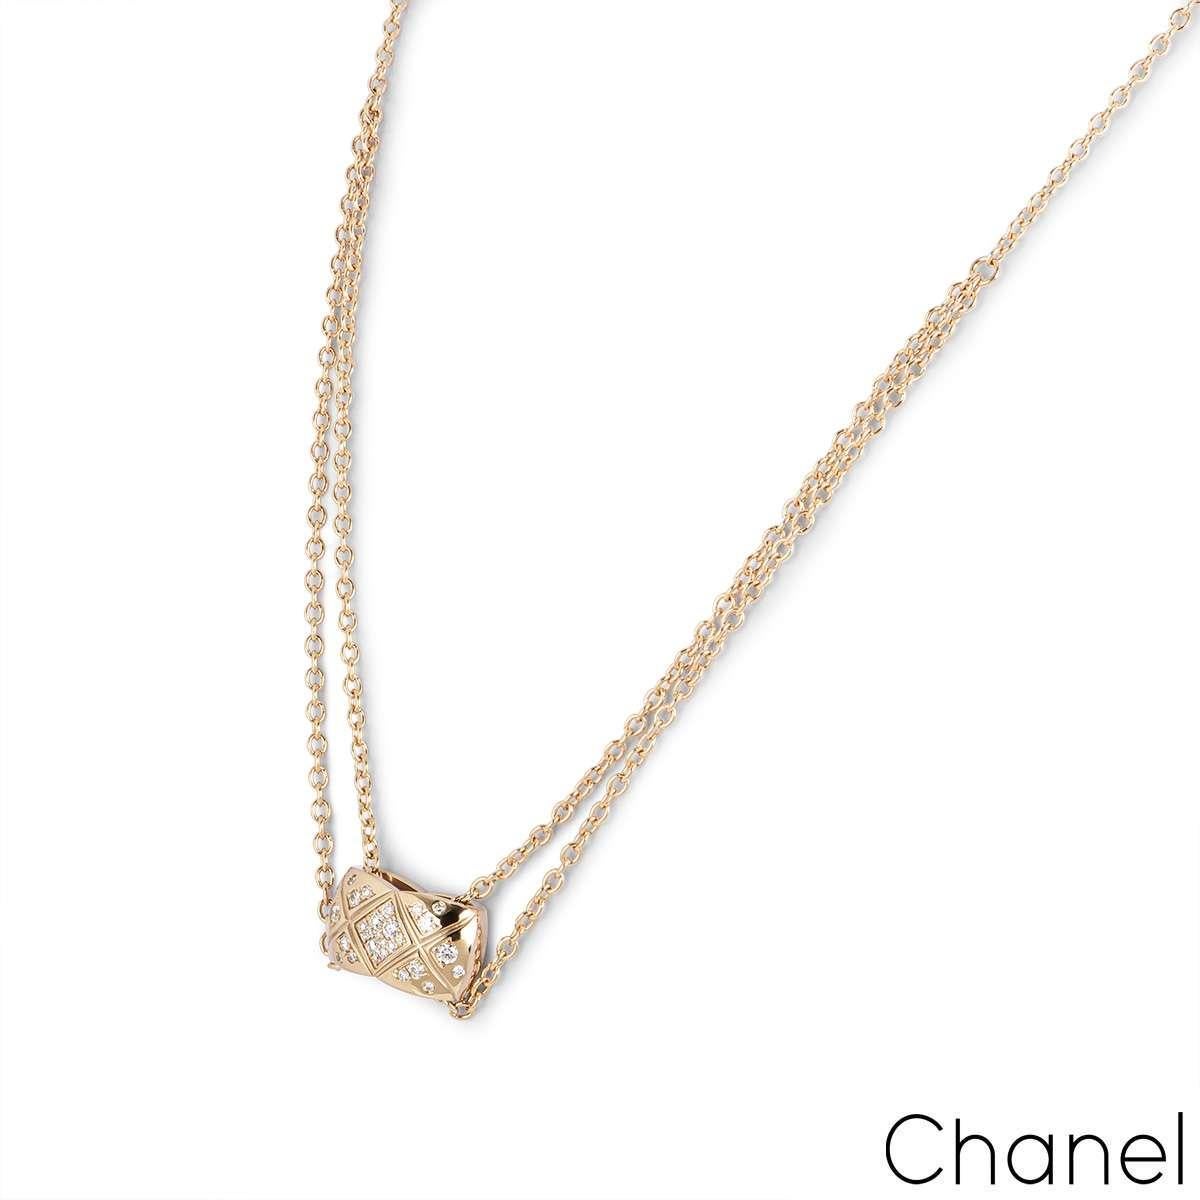 A beautiful 18k beige / rose gold diamond Chanel necklace from the Coco Crush collection. The necklace comprises of a quilted rectangular motif set with round brilliant cut diamonds in the centre. The diamonds have a total weight of 0.16. The